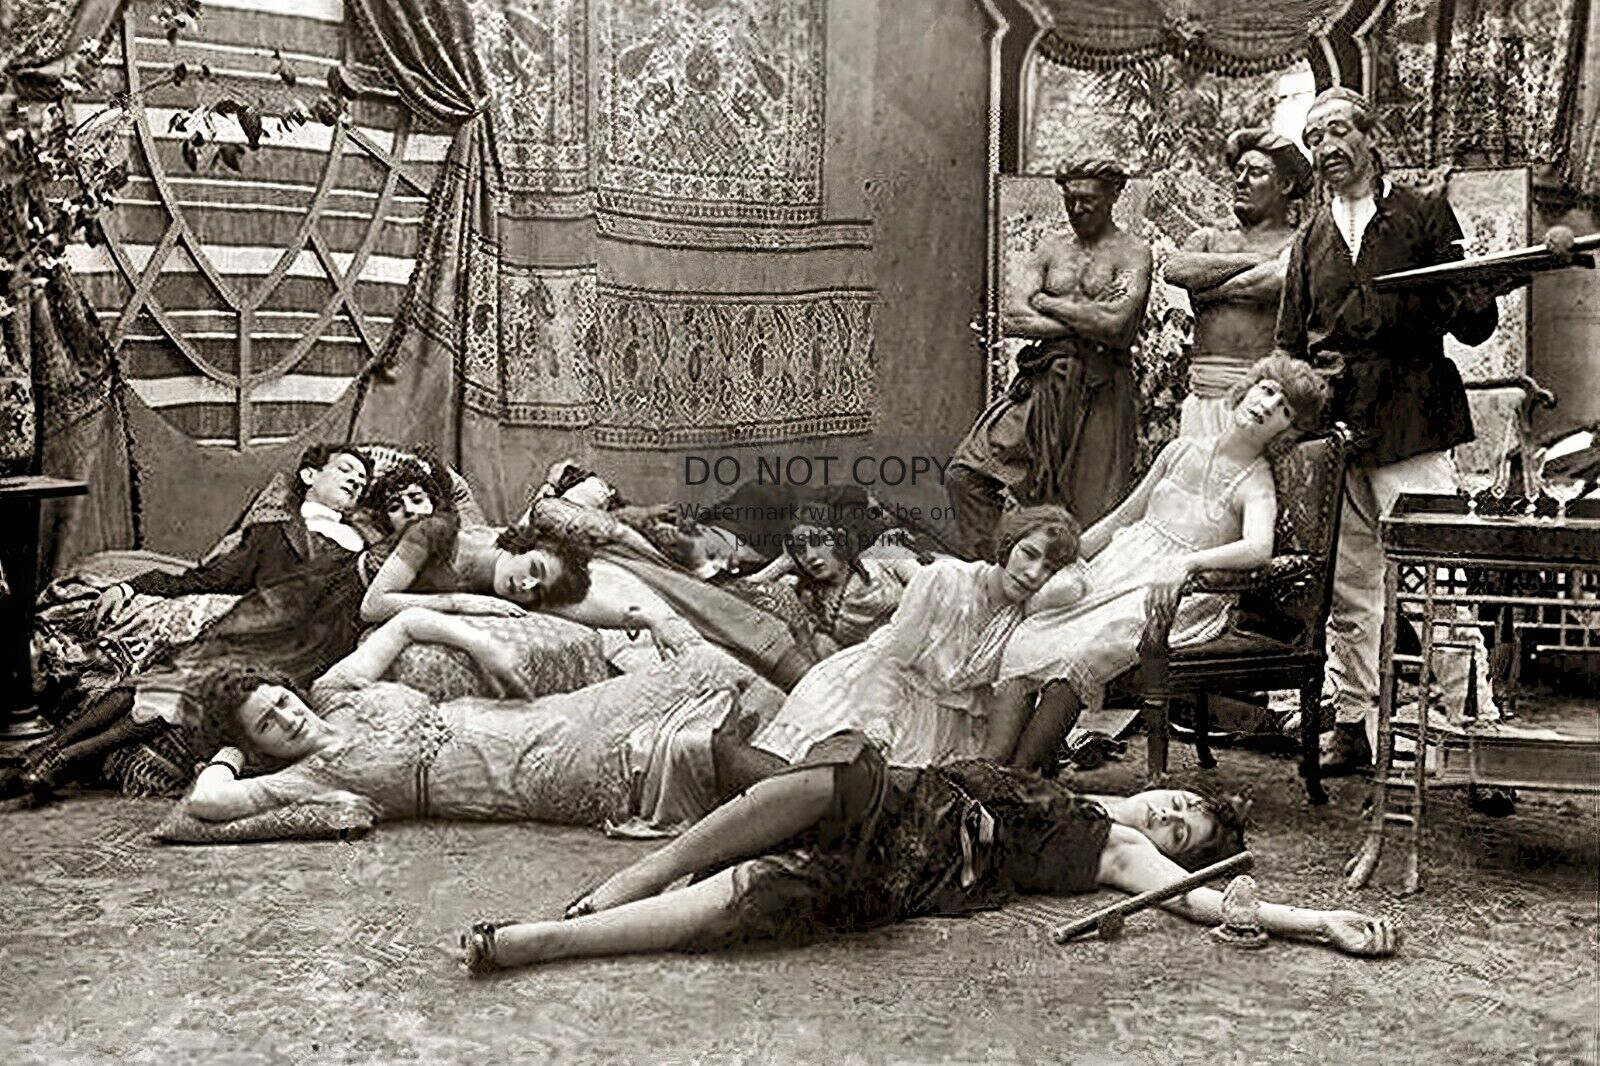 FRENCH OPIUM PARTY 1918 HISTORIC 4X6 PHOTO POSTCARD